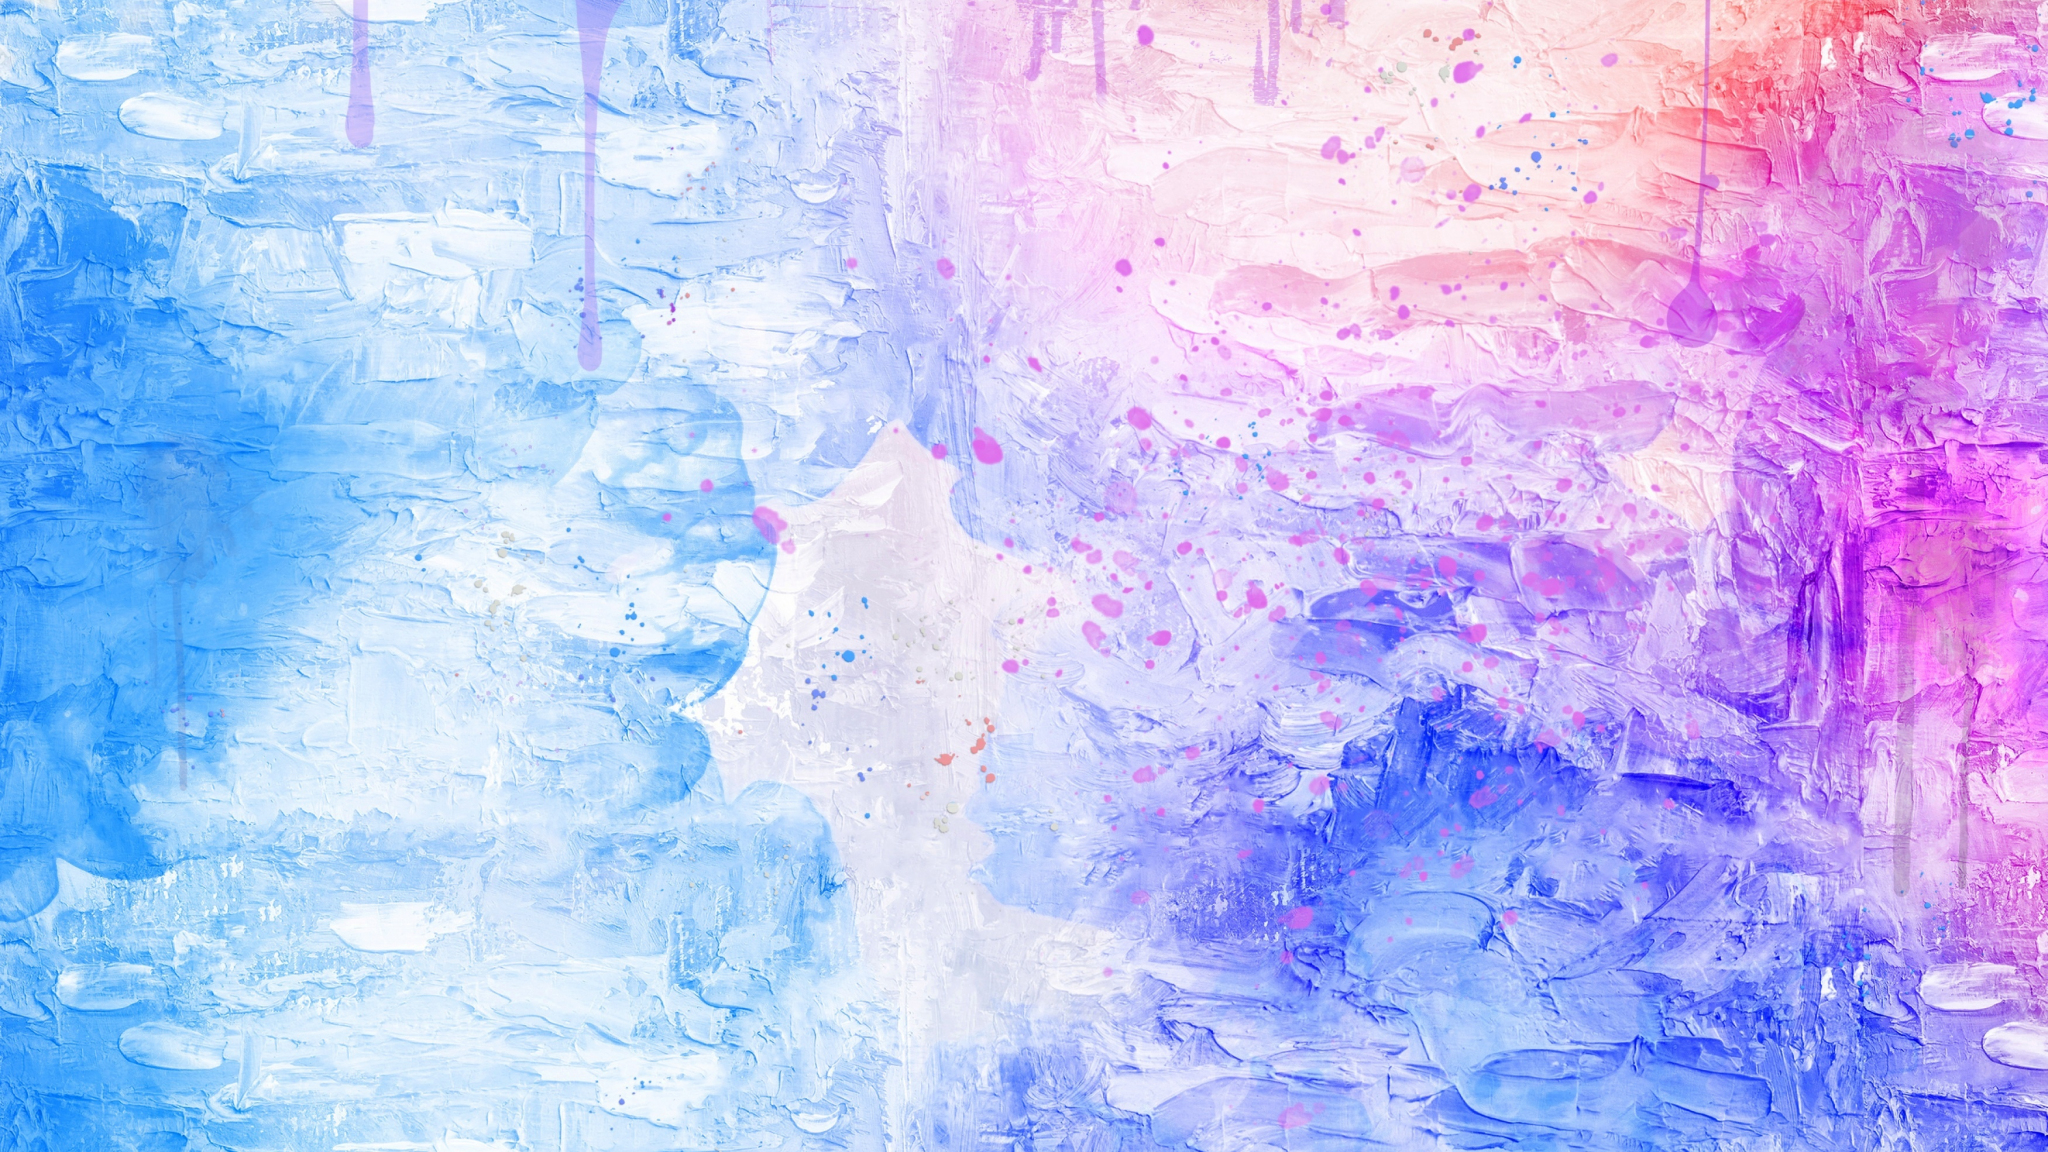 Download 48x1152 Wallpaper Blue Pink Water Colors Art Canvas Surface Dual Wide Widescreen 48x1152 Hd Image Background